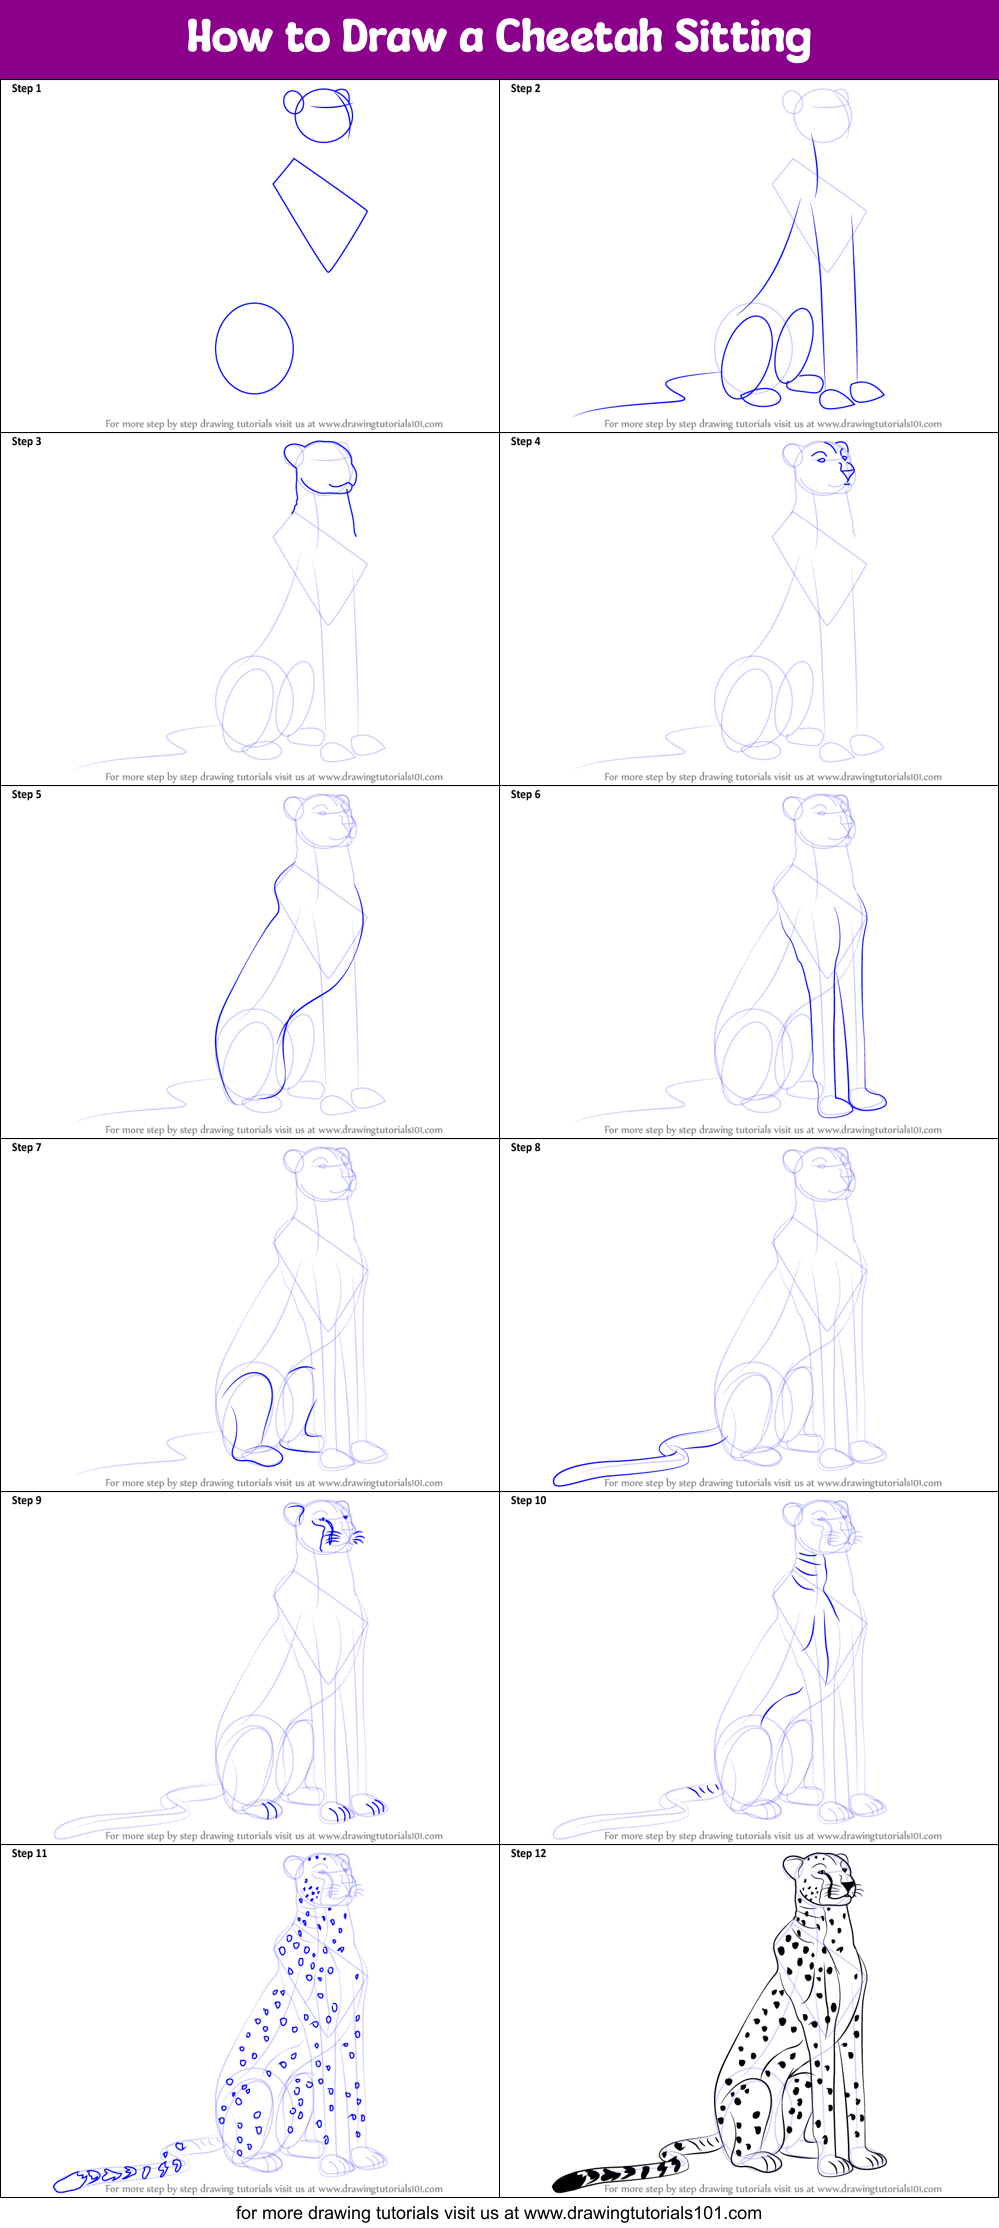 How to Draw a Cheetah Sitting printable step by step